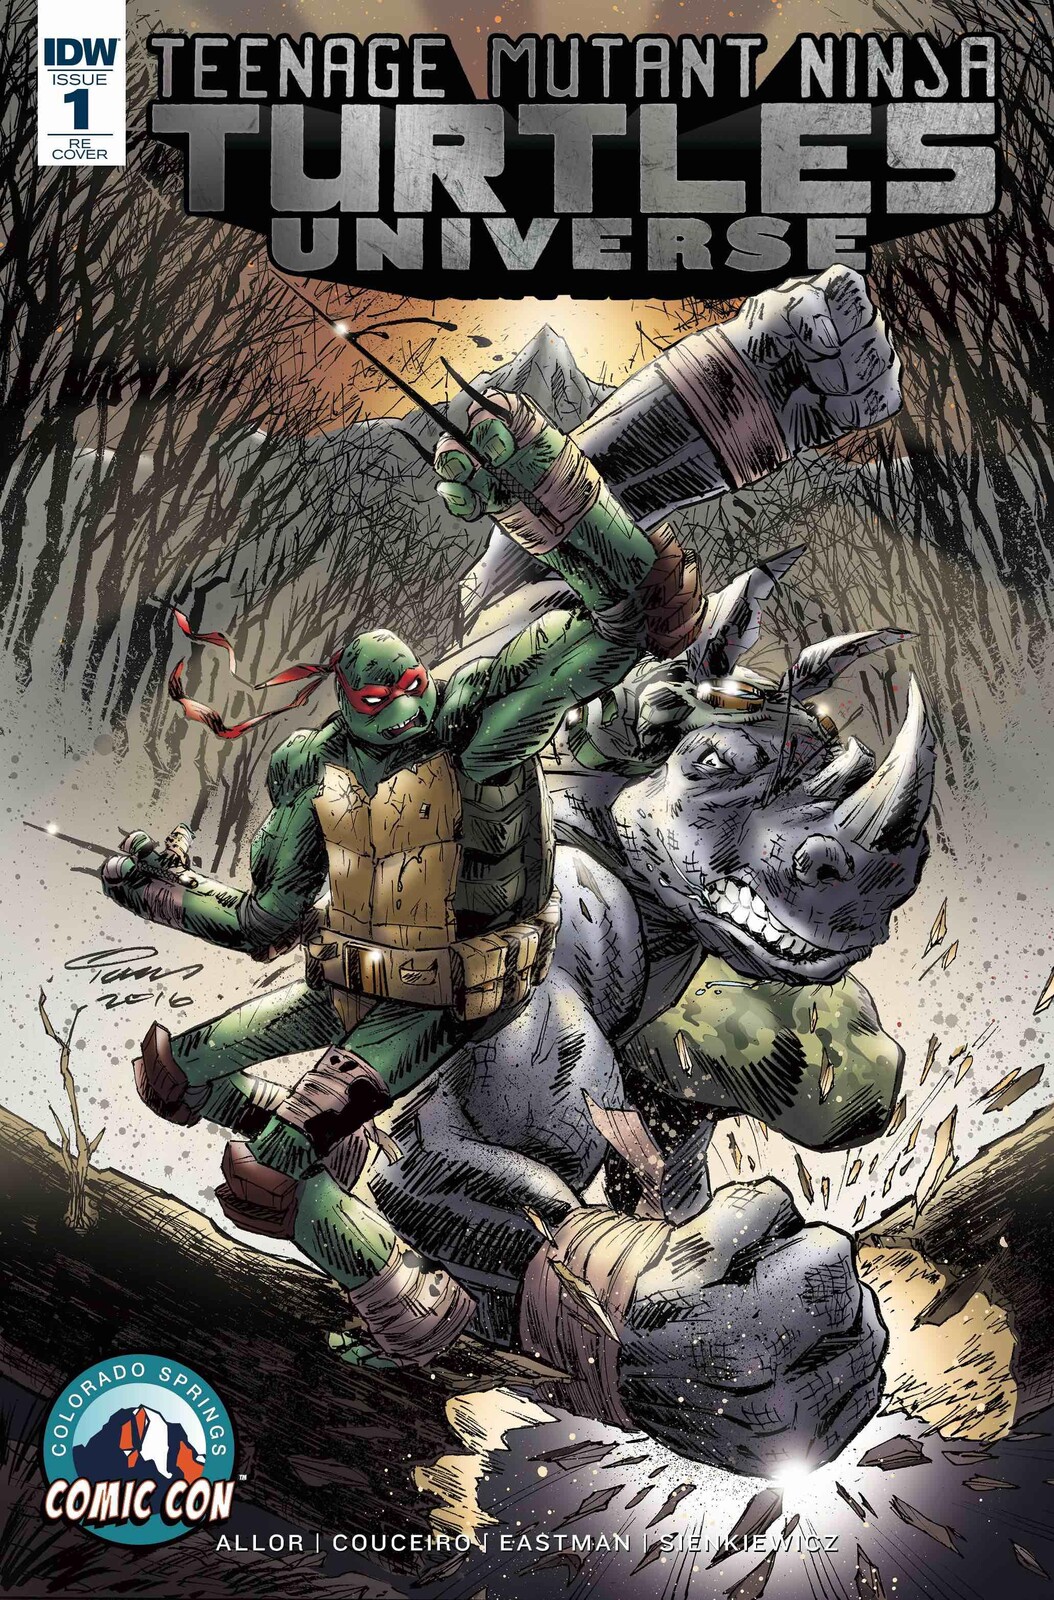 Published TMNT Universe #1 Cover